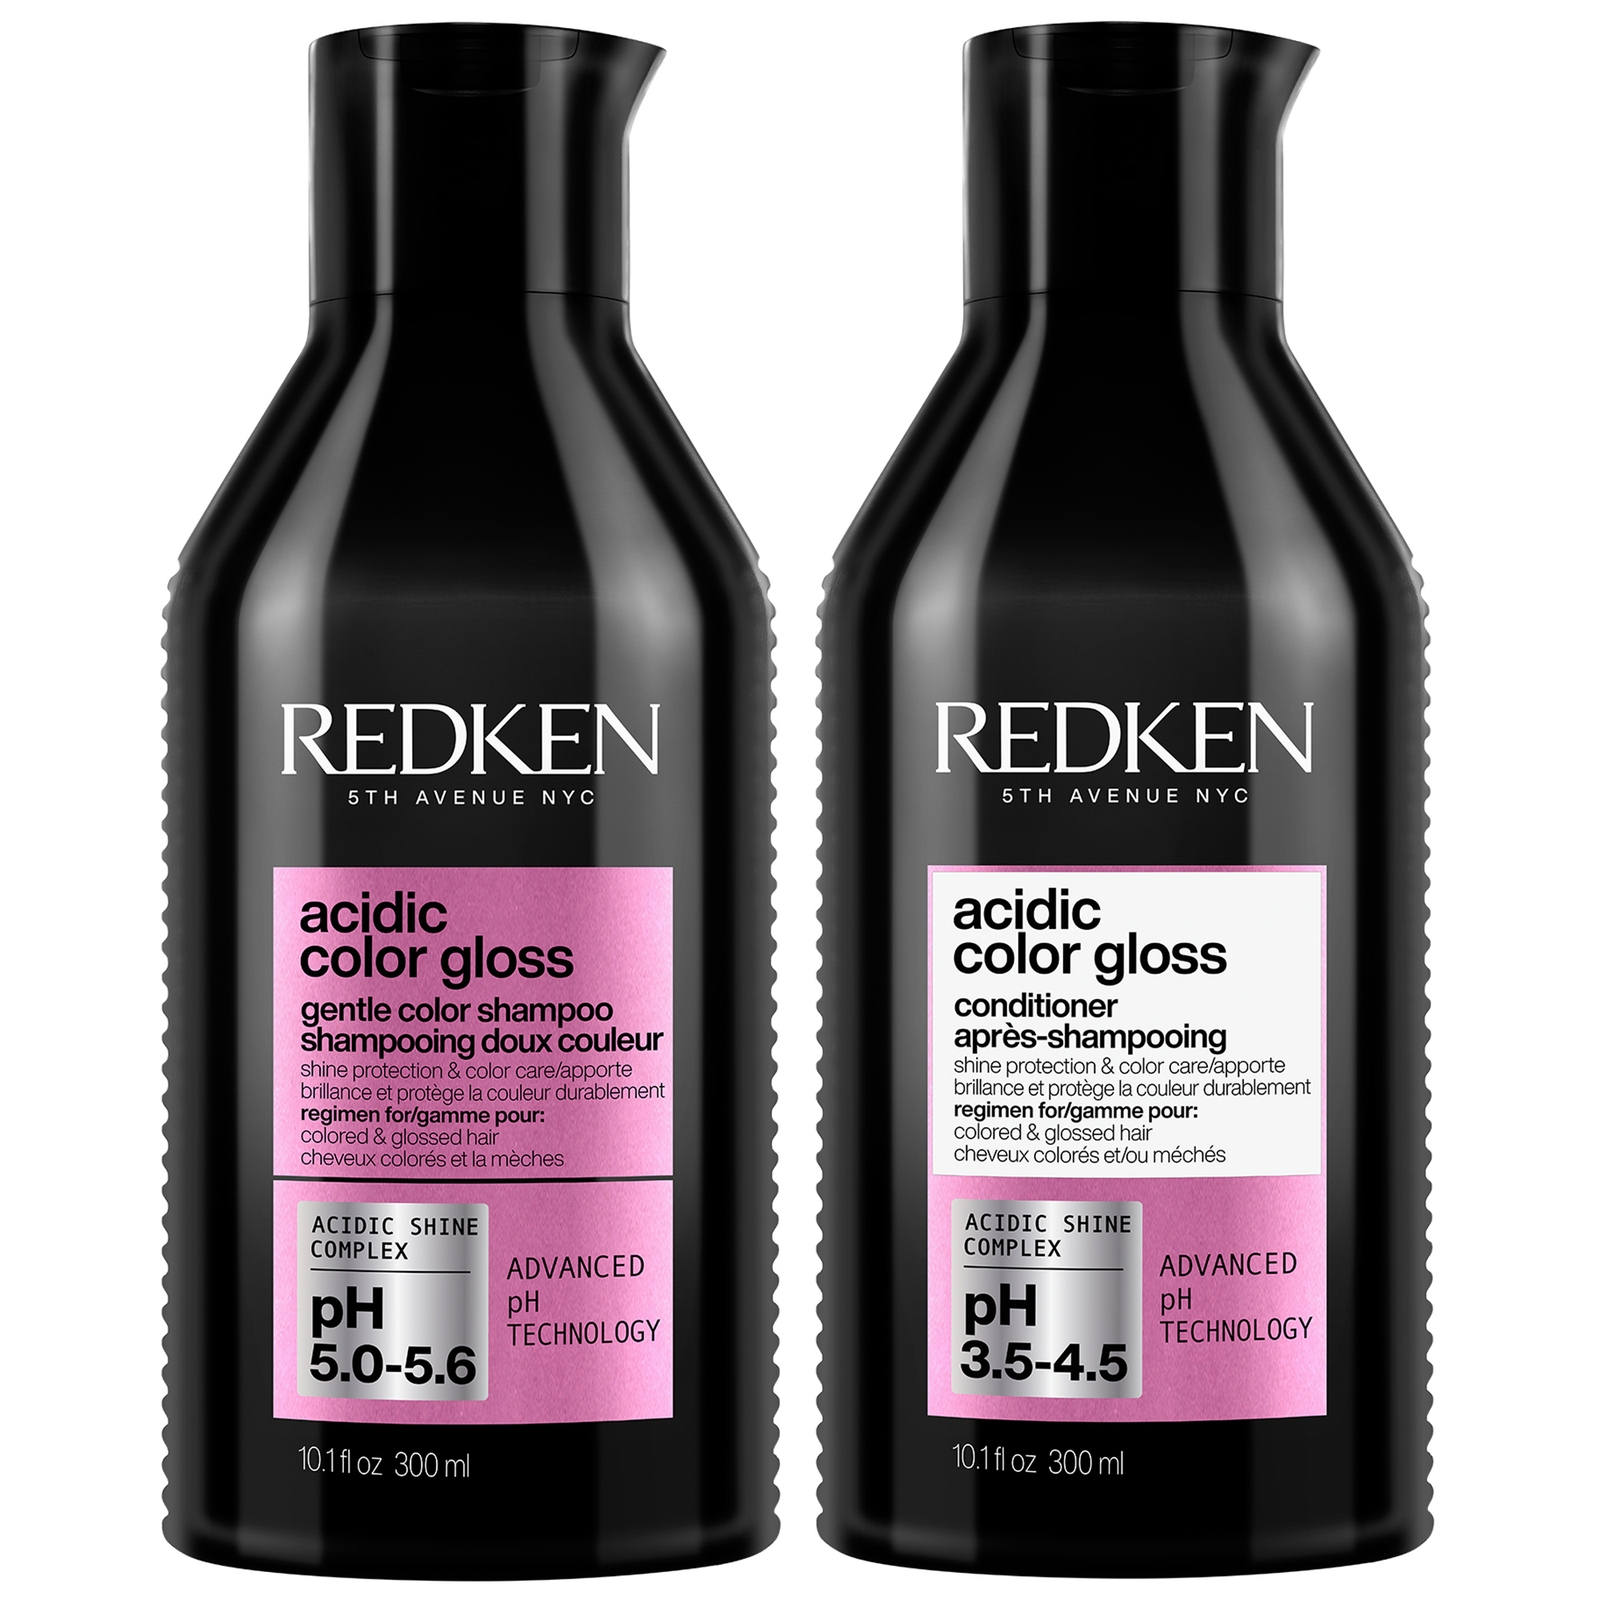 Redken Acidic Color Gloss Shampoo and Conditioner 300ml, Colour Protection Routine for Glass-Like Sh